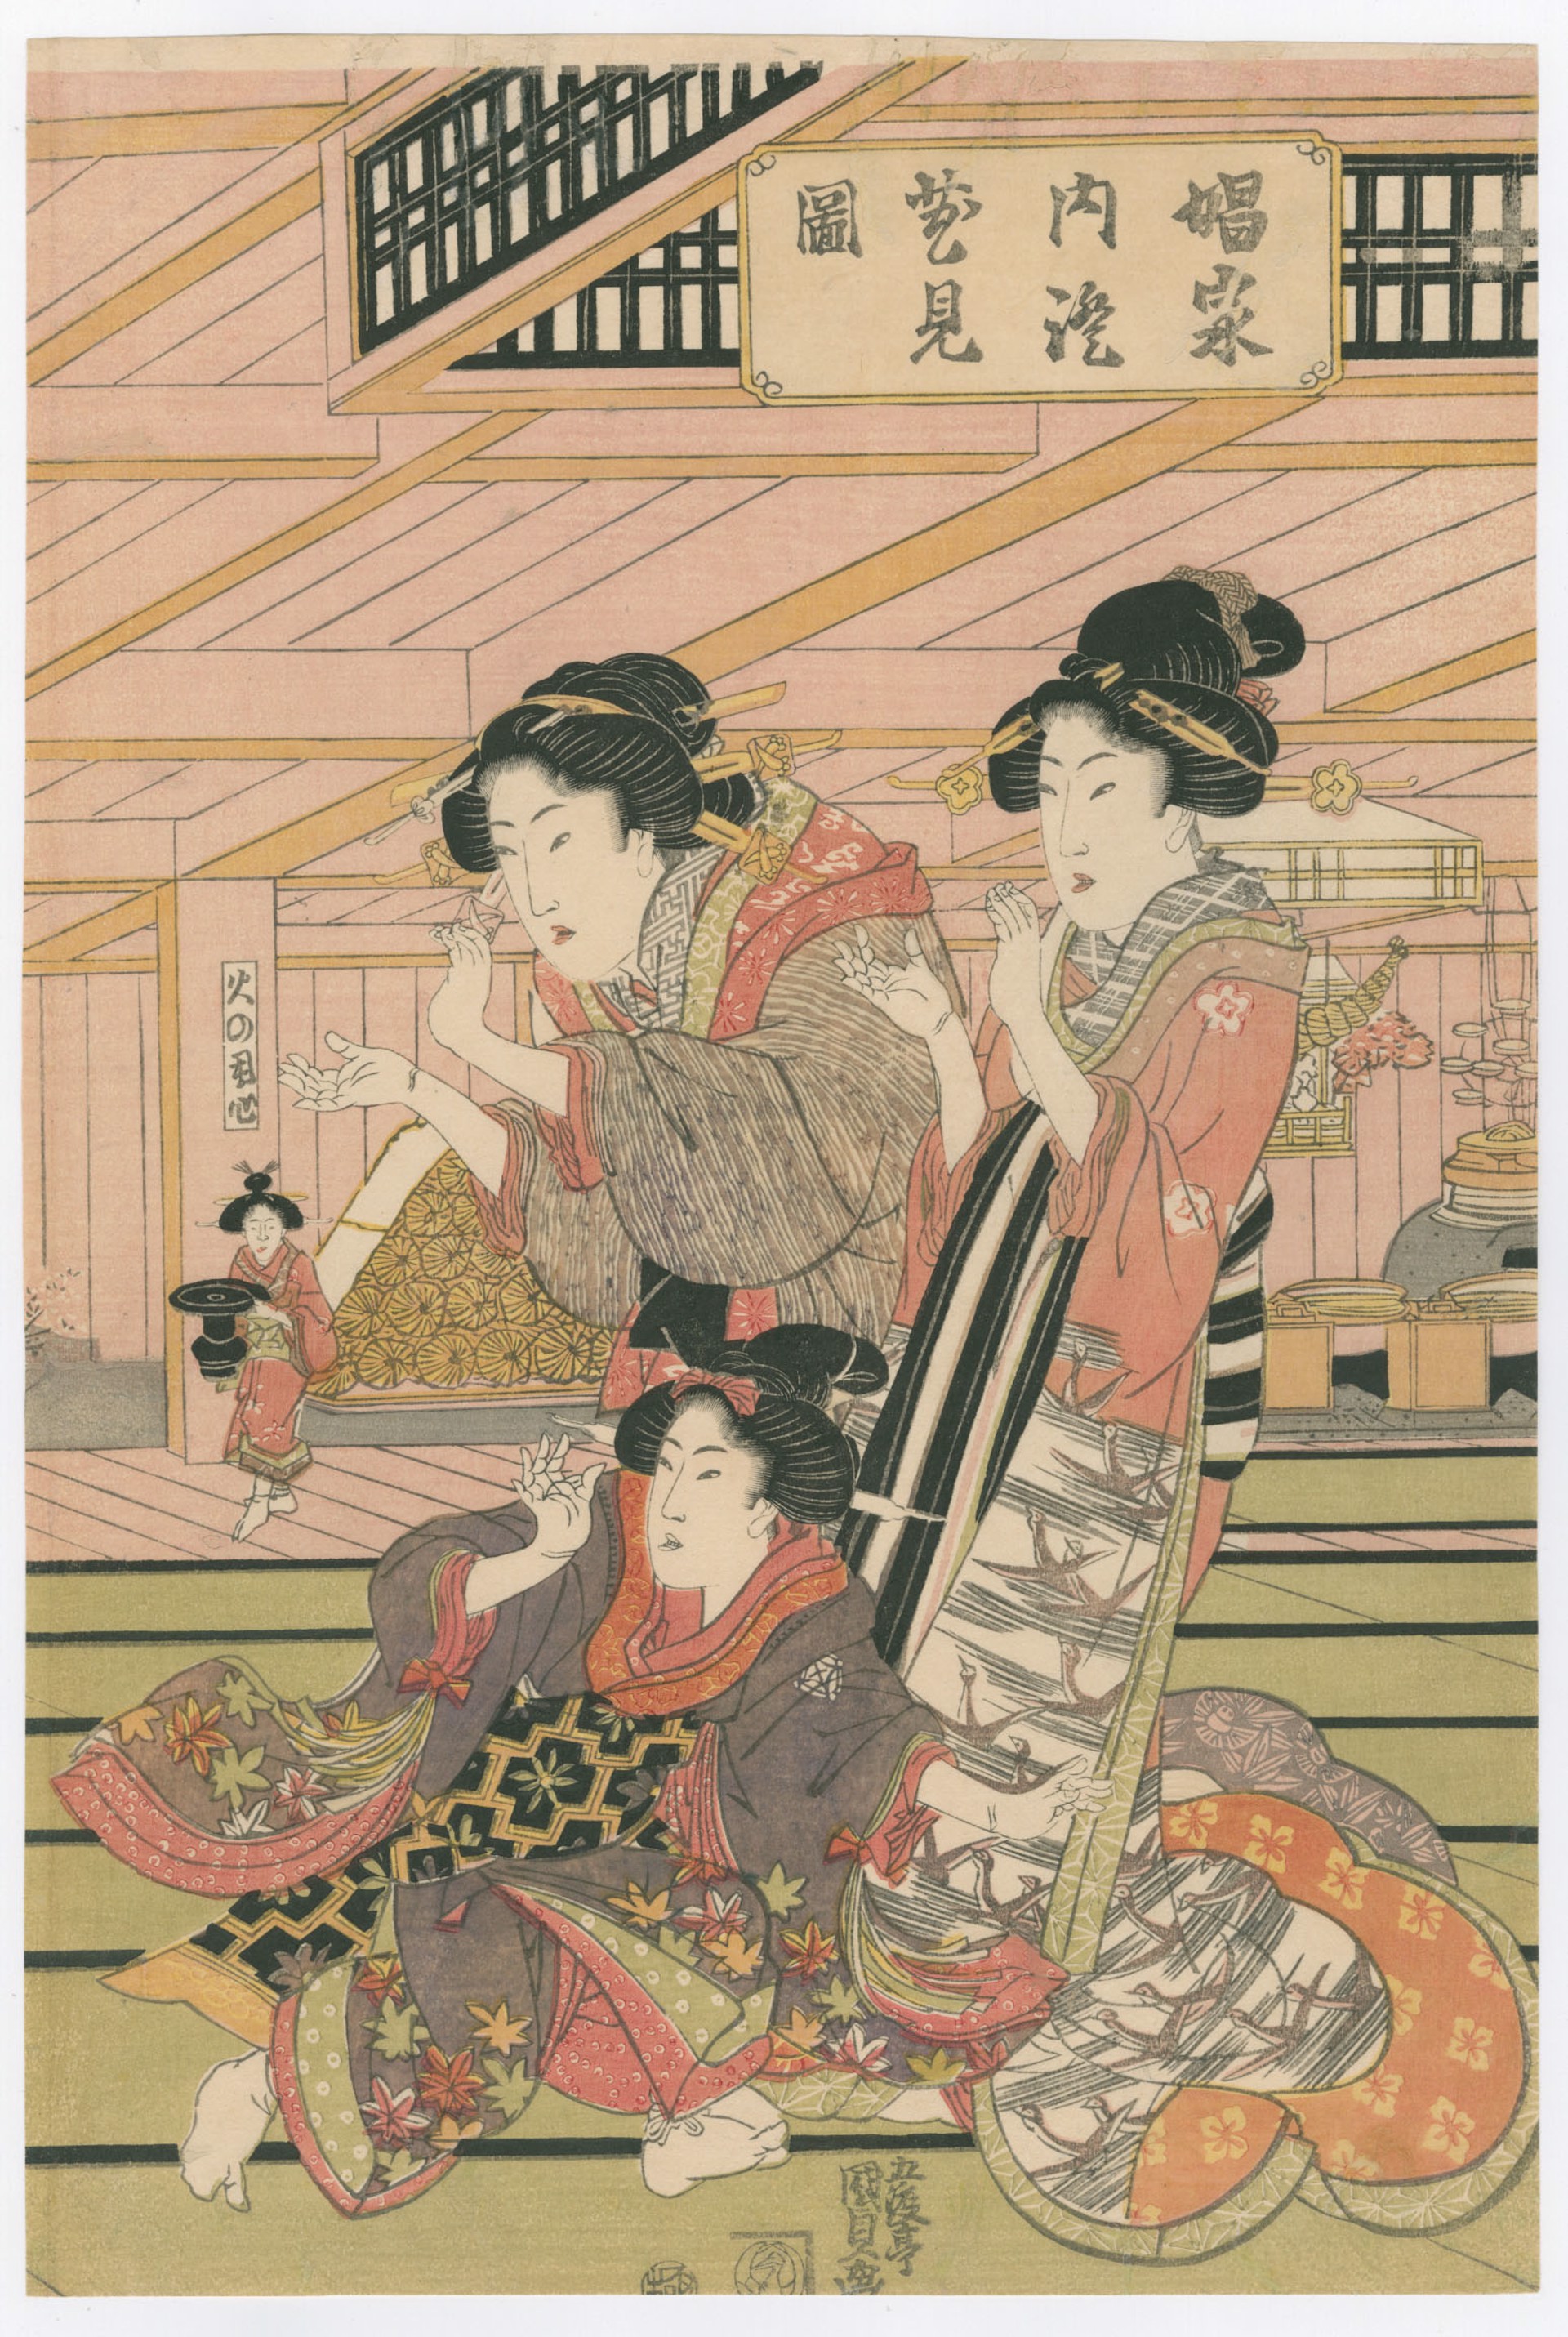 Courtesans Entertaining Themselves in a Brothel by Kunisada